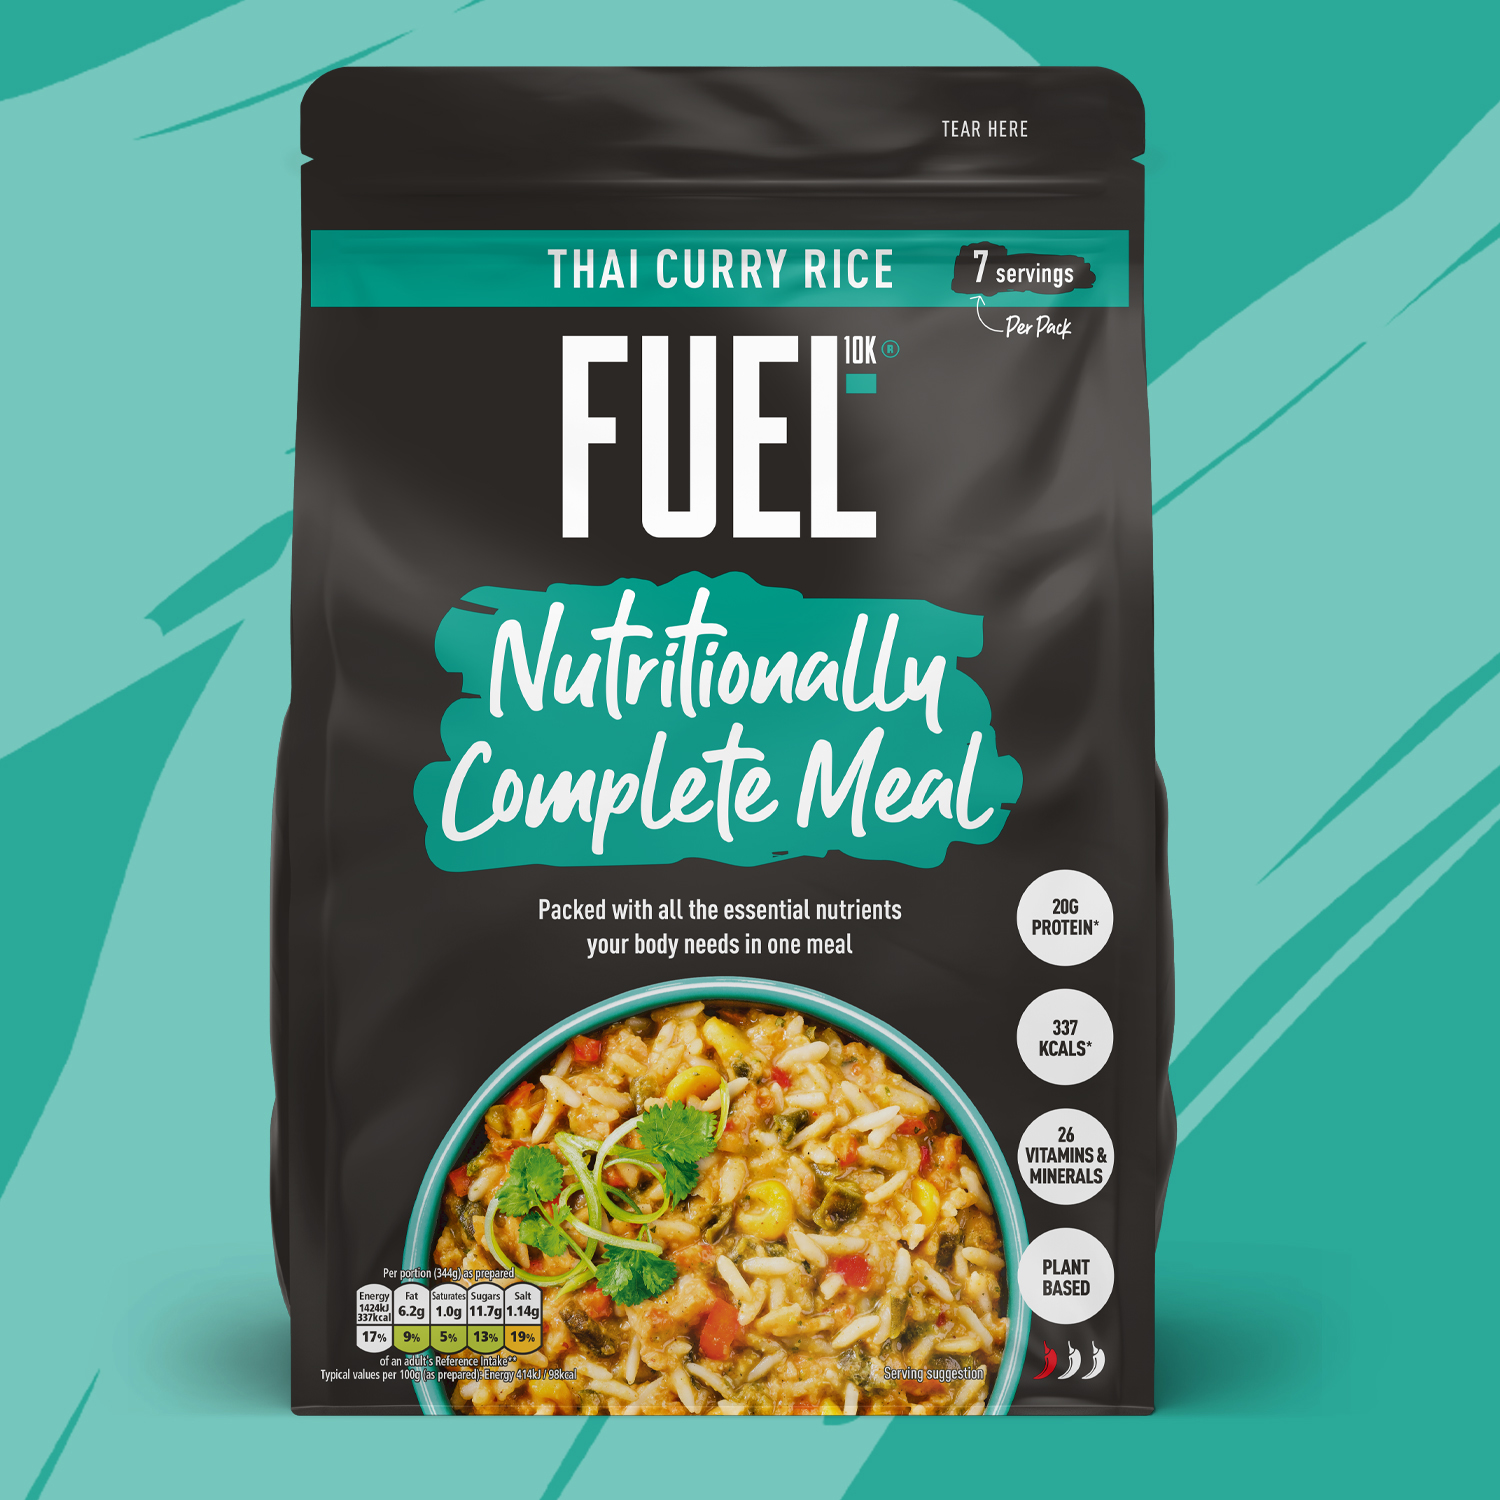 FUEL10K. Shop Nutritionally Complete Meal Rice - Thai Curry flavour